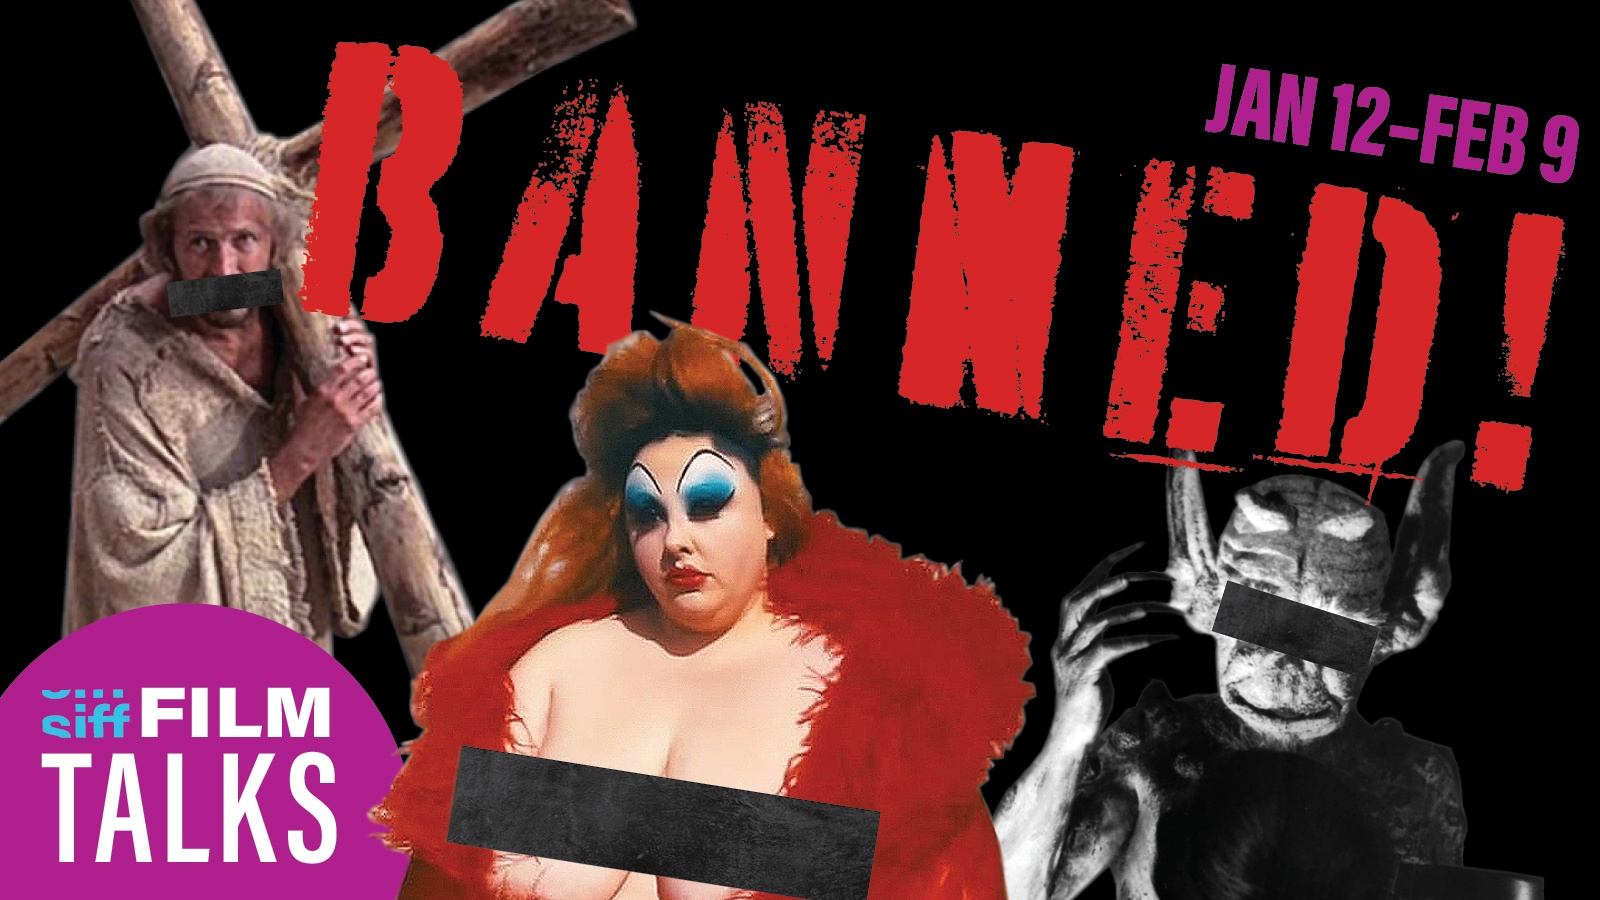 BANNED! SIFF Film Talks collage with characters from Monty Python's Life of Brian, Pink Flamingoes, and the silent film Haxan